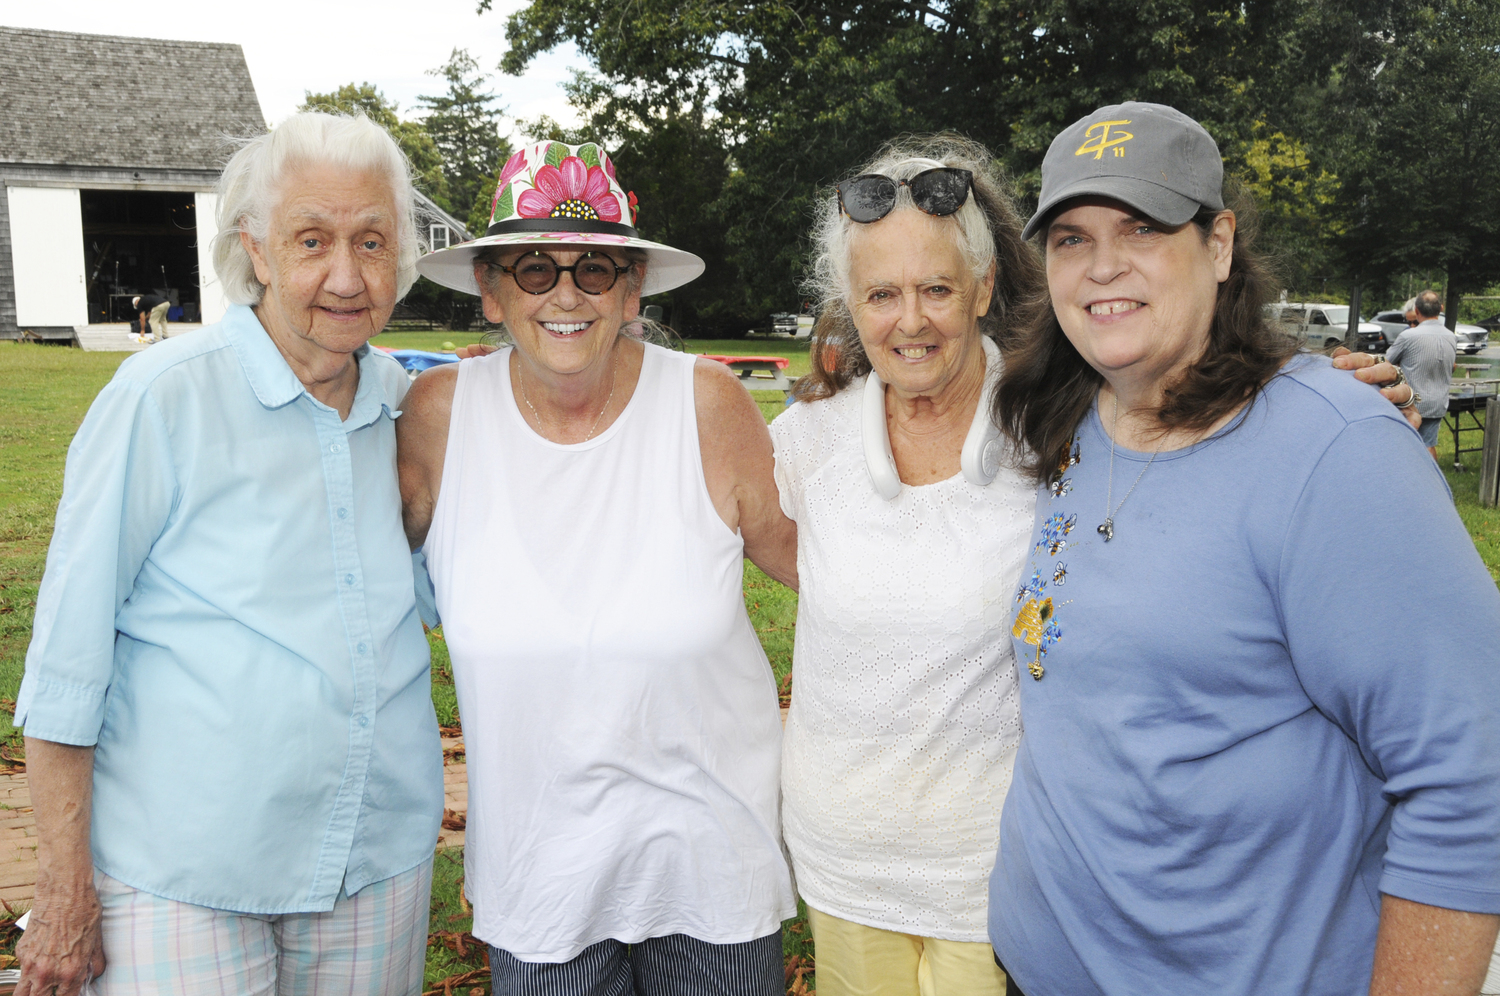 Alice Wood, Terri Gaines, Prudence Carabine and Dana Lester at the Farm to Table Dinner at the East Hampton Historical Farm Museum on Sunday afternoon.  RICHARD LEWIN